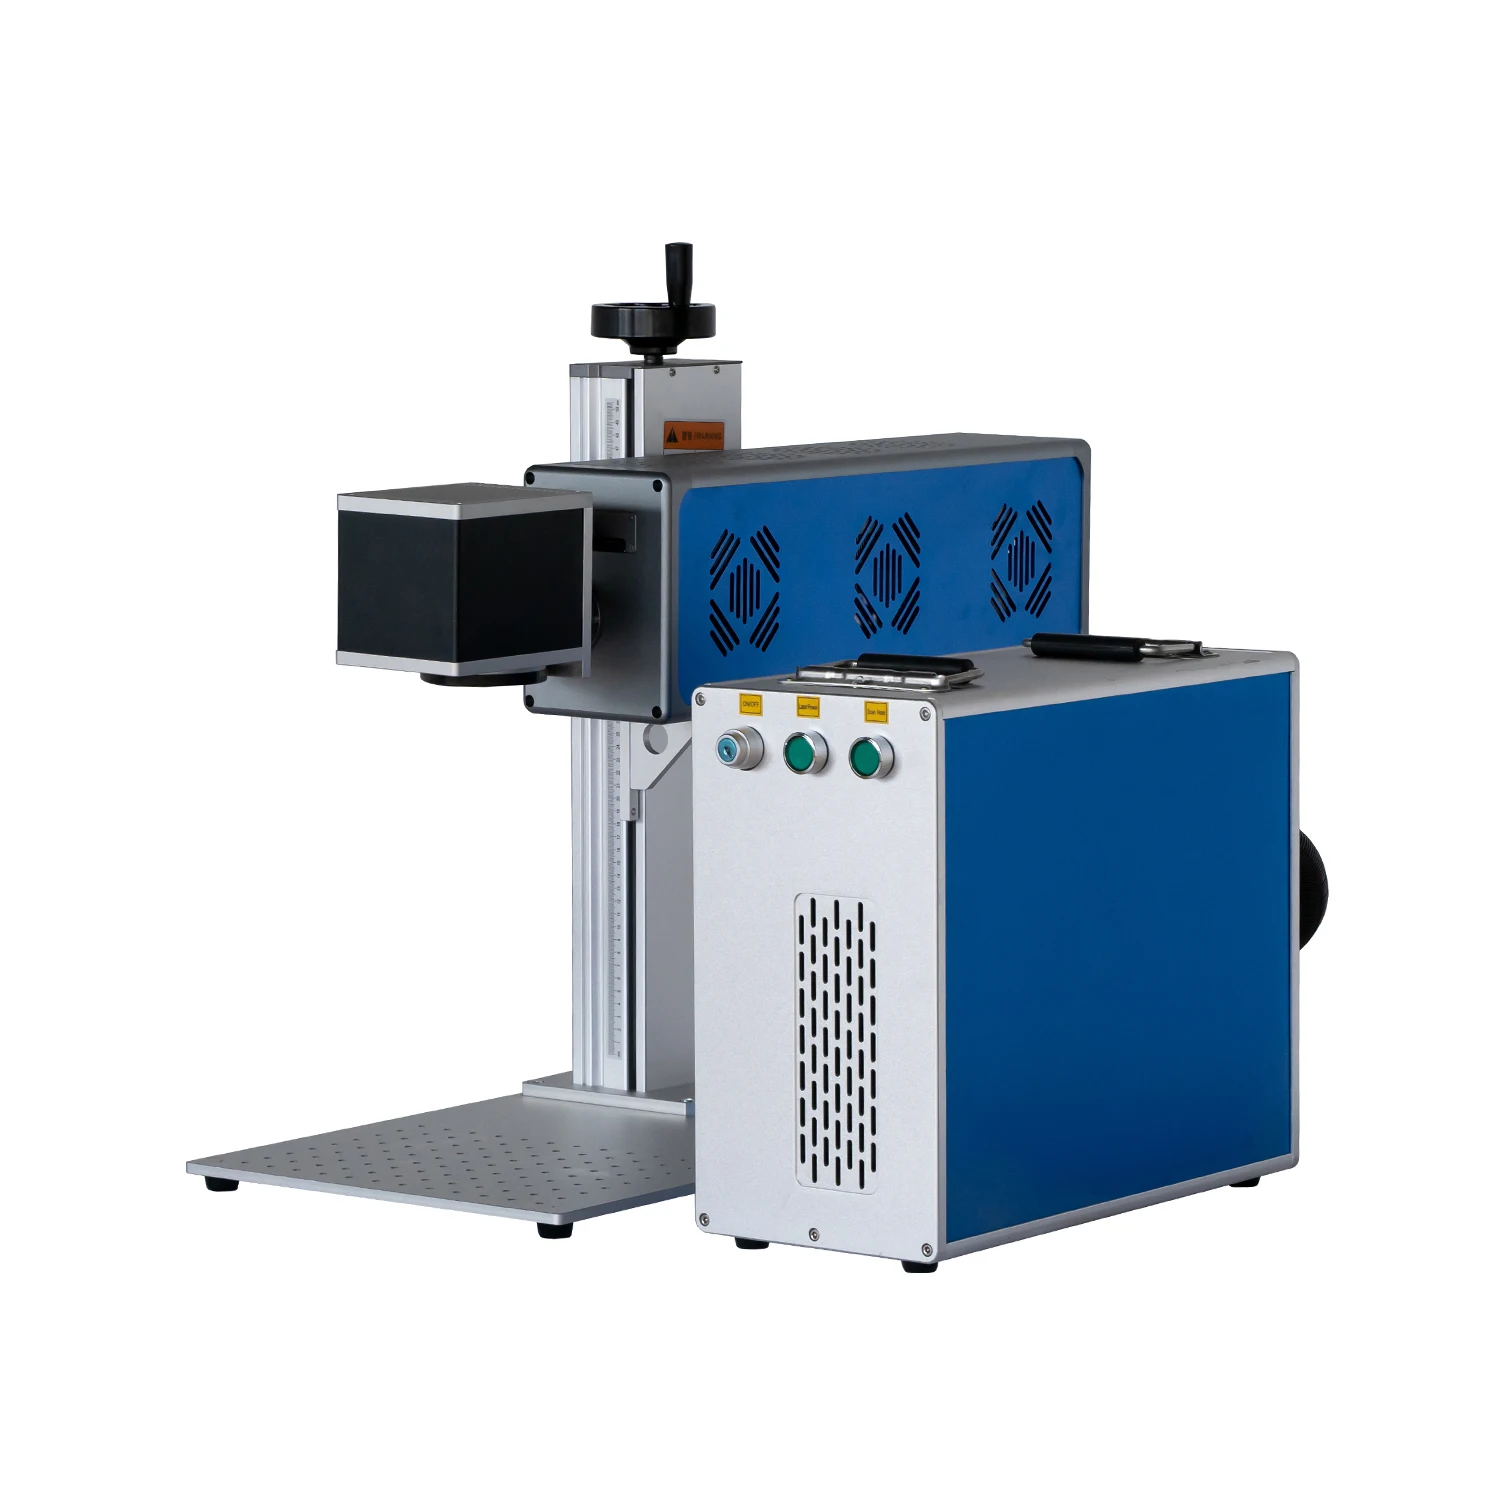 CO2 Galvo Laser Marking Paper in Real Time 